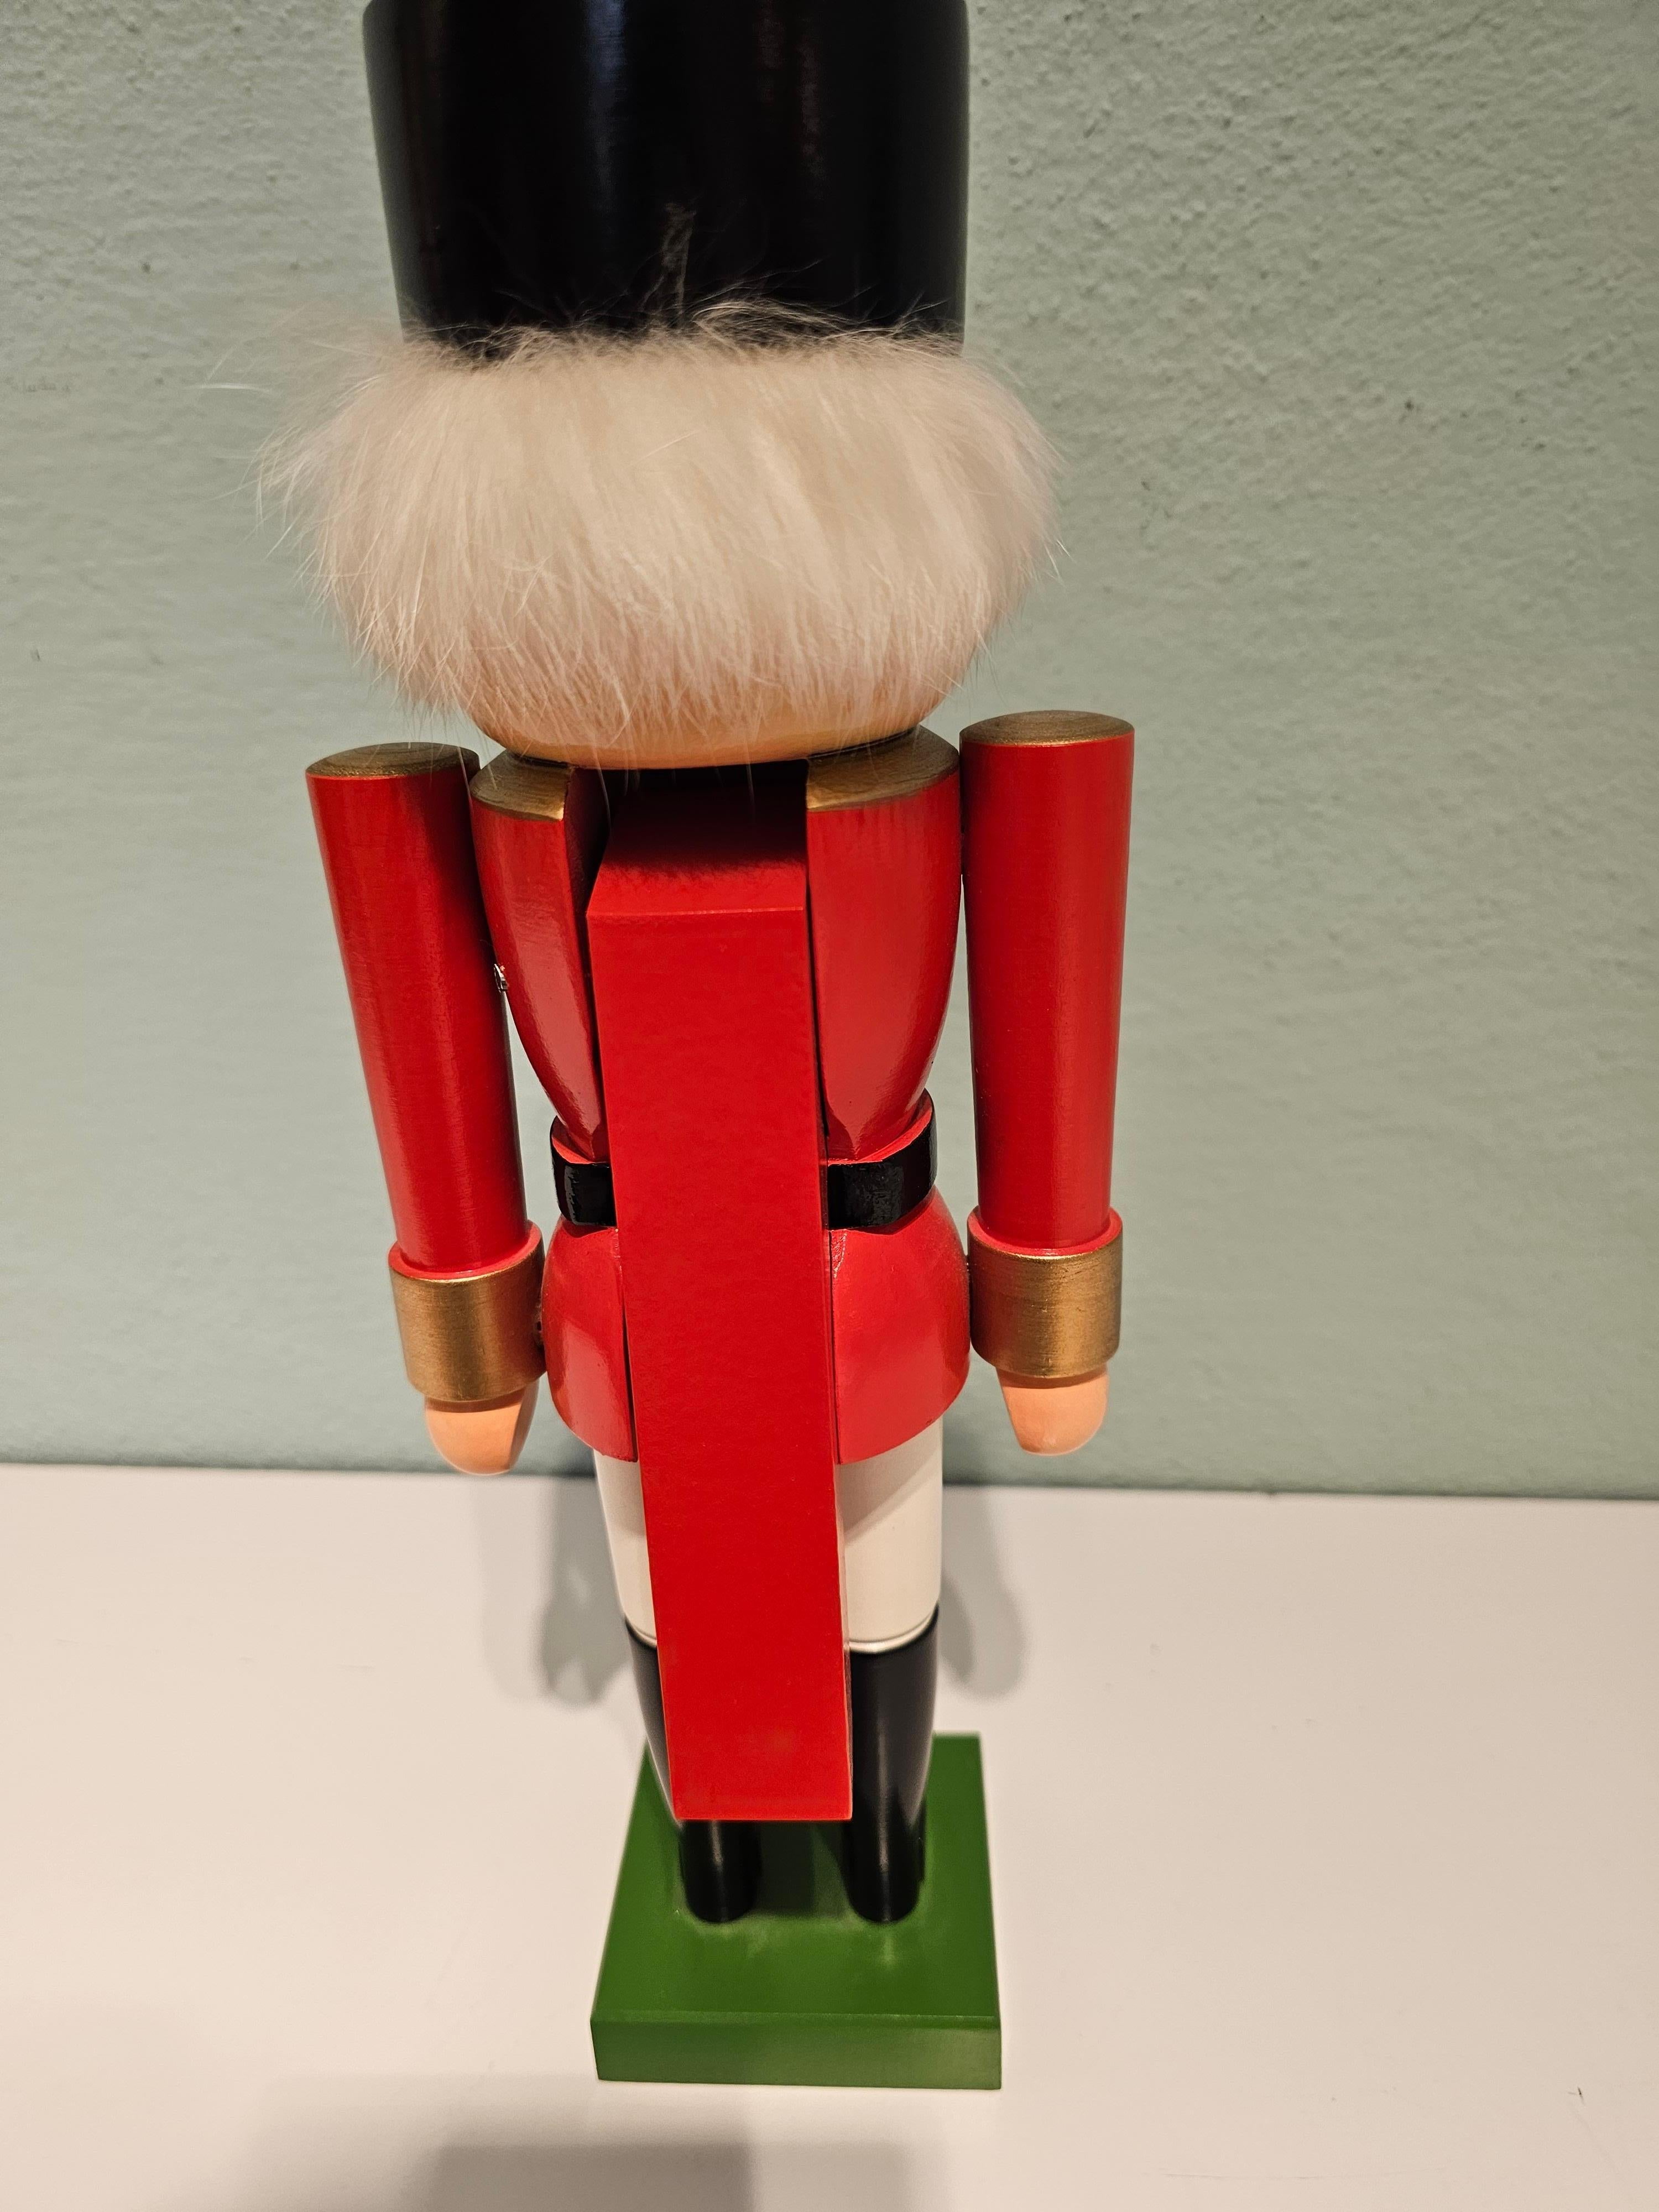 Vintage wooden nutcracker figure from the Erzgebirge. The region Erzgebirge formerly Eastern Germany is famous for this special kind of nutcrackers, where intricate carving has been their home. Completely hand-painted in red and white colors and